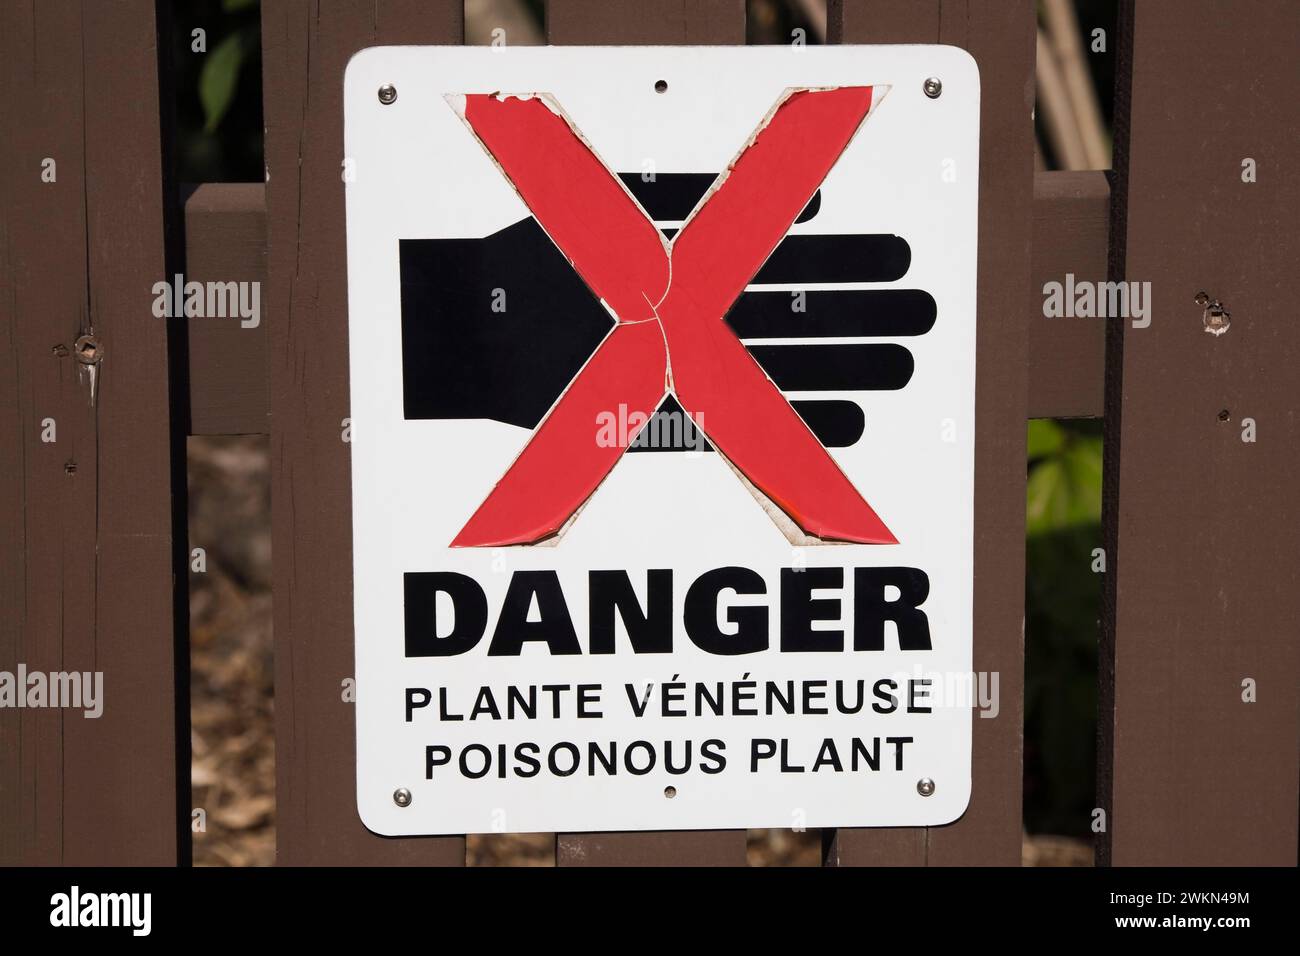 Close-up of posted red, black and white Danger Poisonous Plant pictogram sign in French and English languages in public garden, Montreal, Quebec, Cana Stock Photo